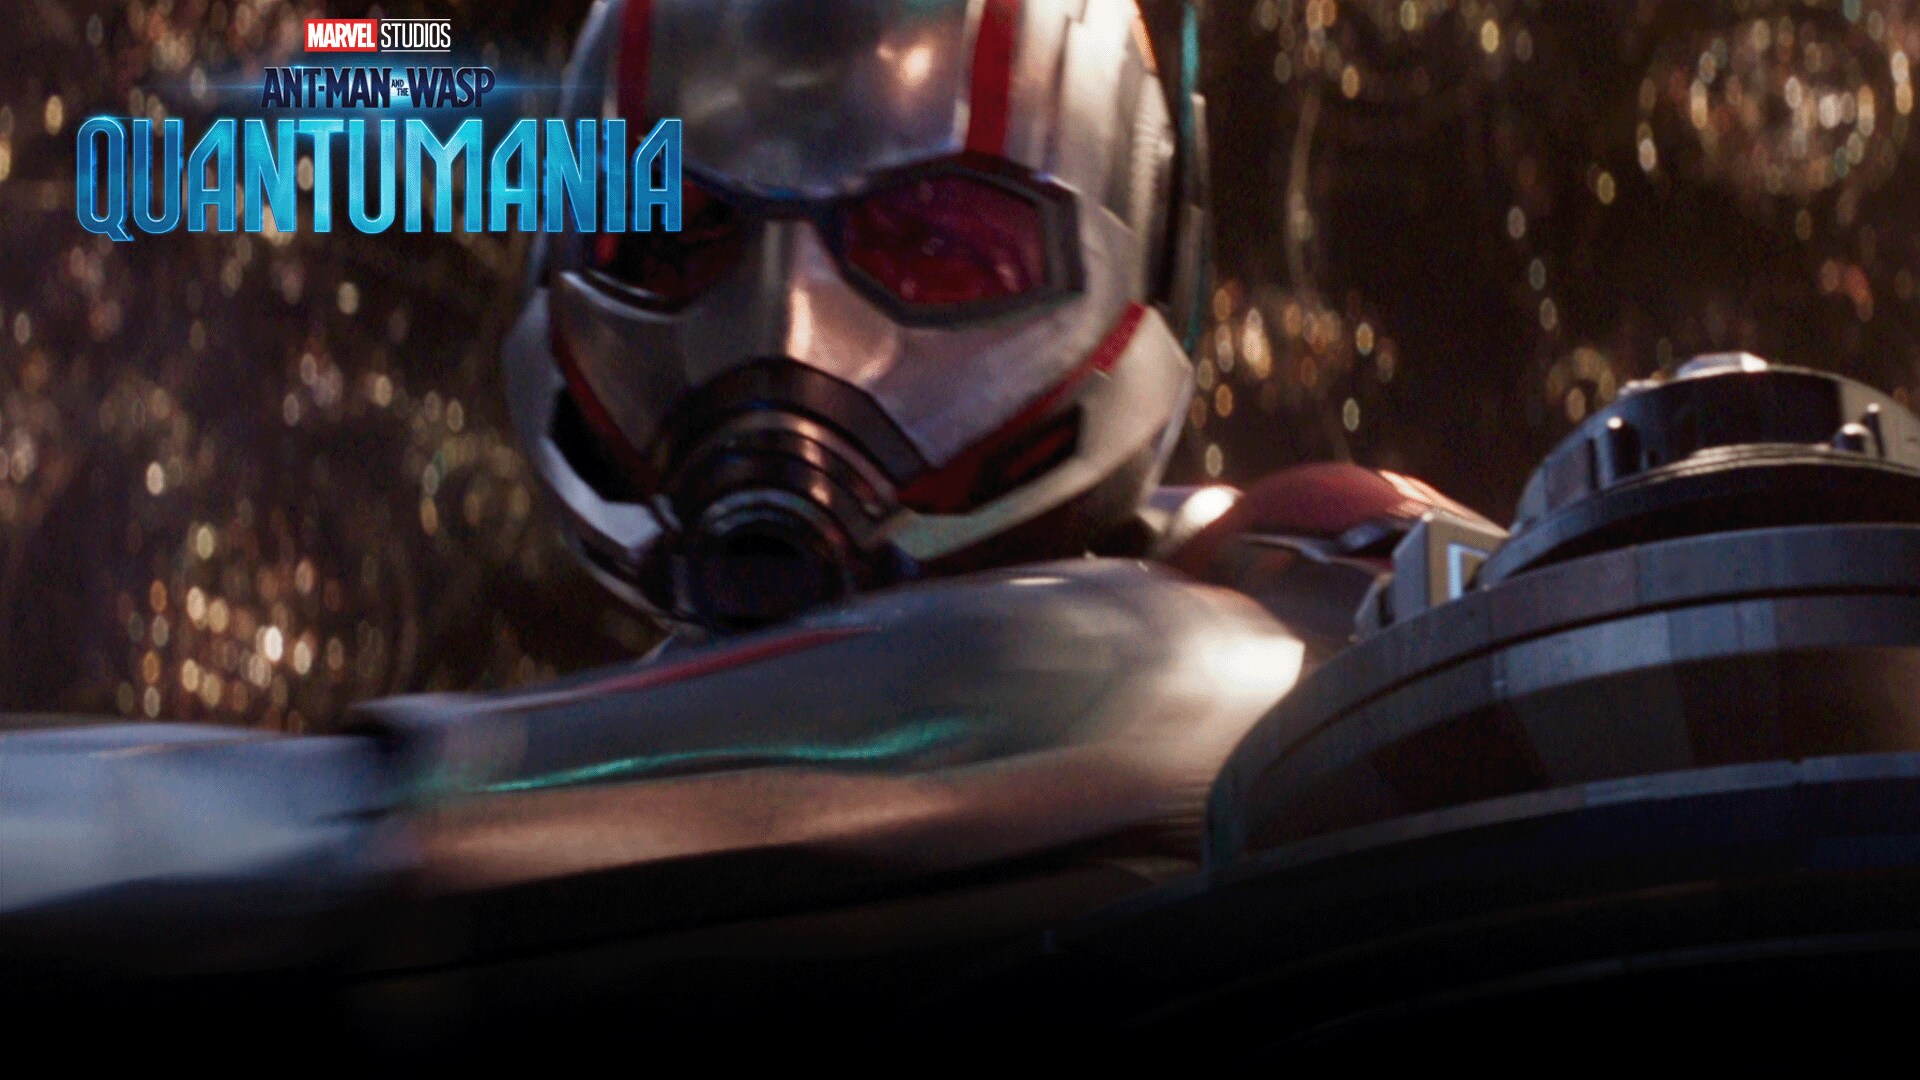 Marvel Studios’ Ant-Man and The Wasp: Quantumania | Time